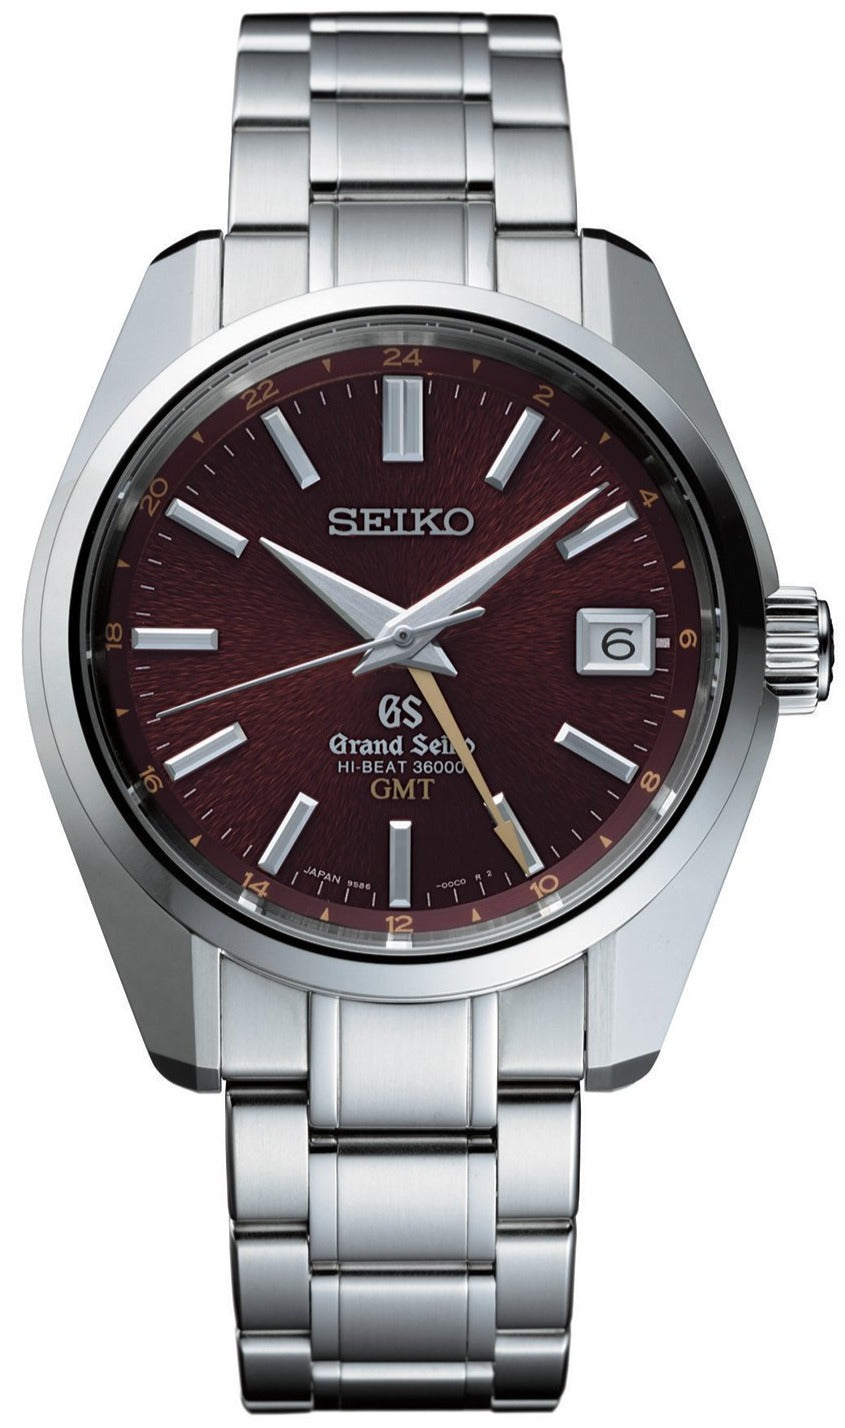 Grand Seiko Automatic Hi-Beat GMT 135th Anniversary Limited Edition SB –  WATCH OUTZ